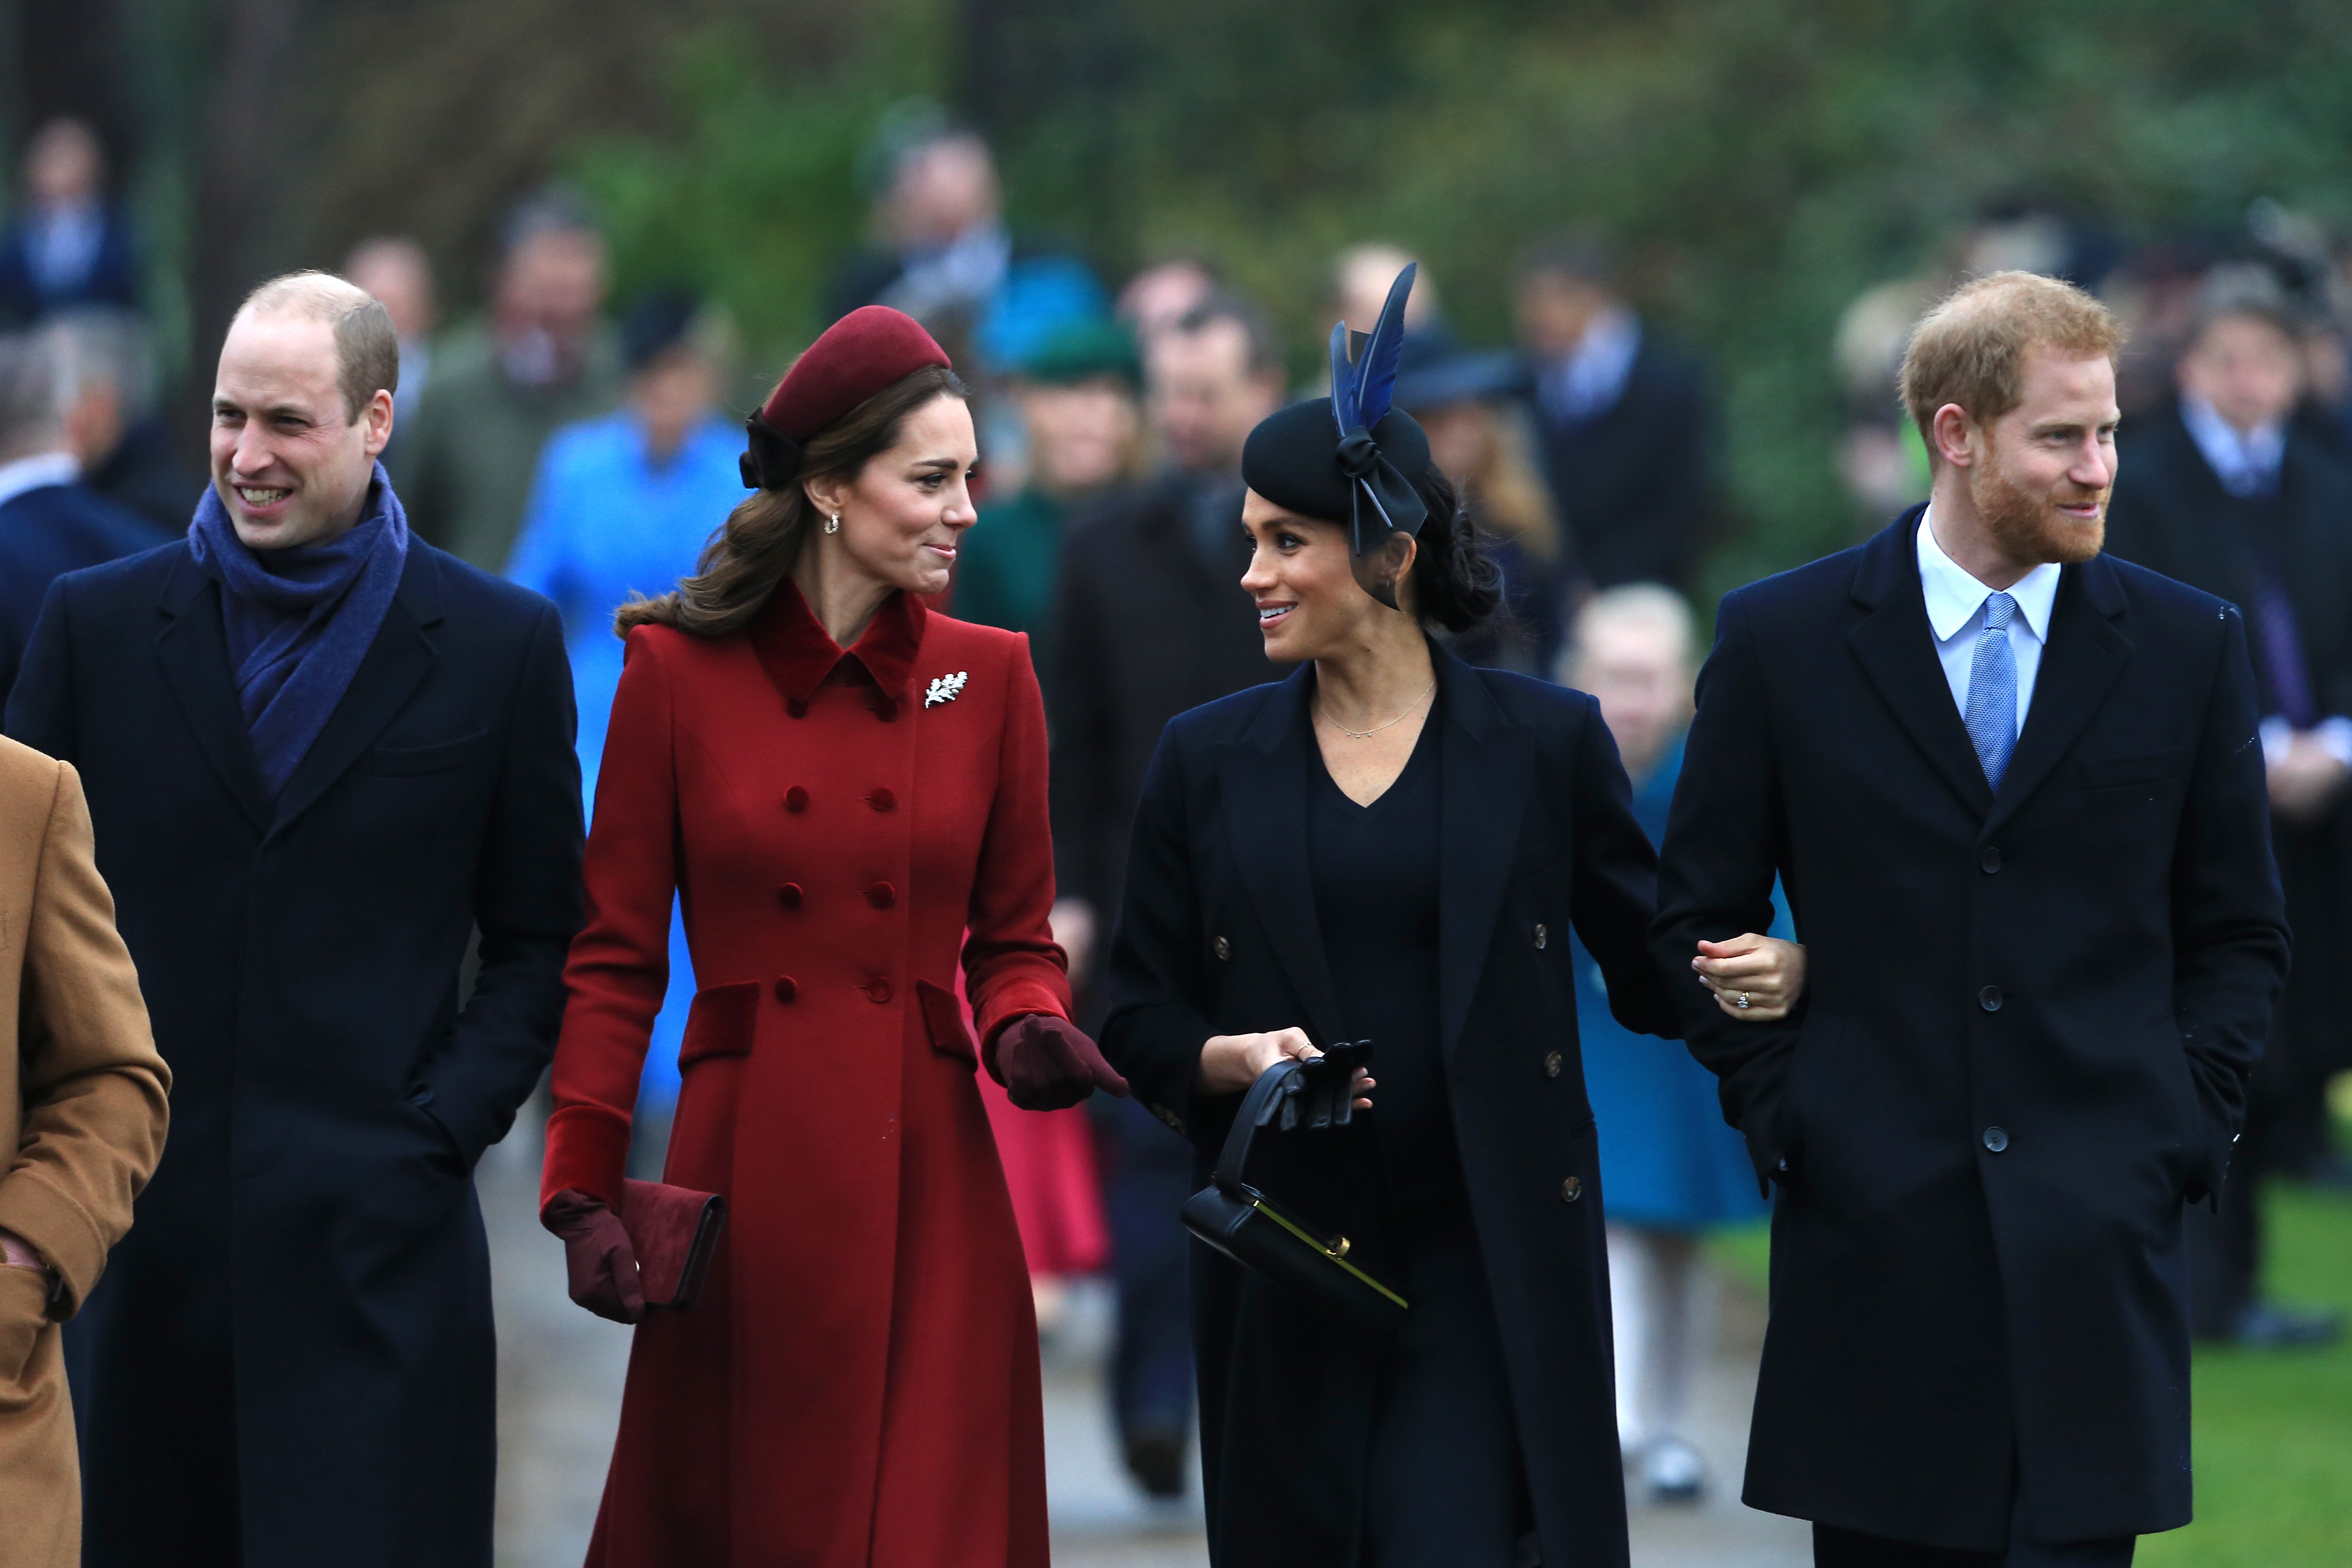 Prince William, Kate Middleton, Meghan Markle and Prince Harry arrive to attend Christmas Day Church service on December 25, 2018 in King's Lynn, England | Photo: Getty Images